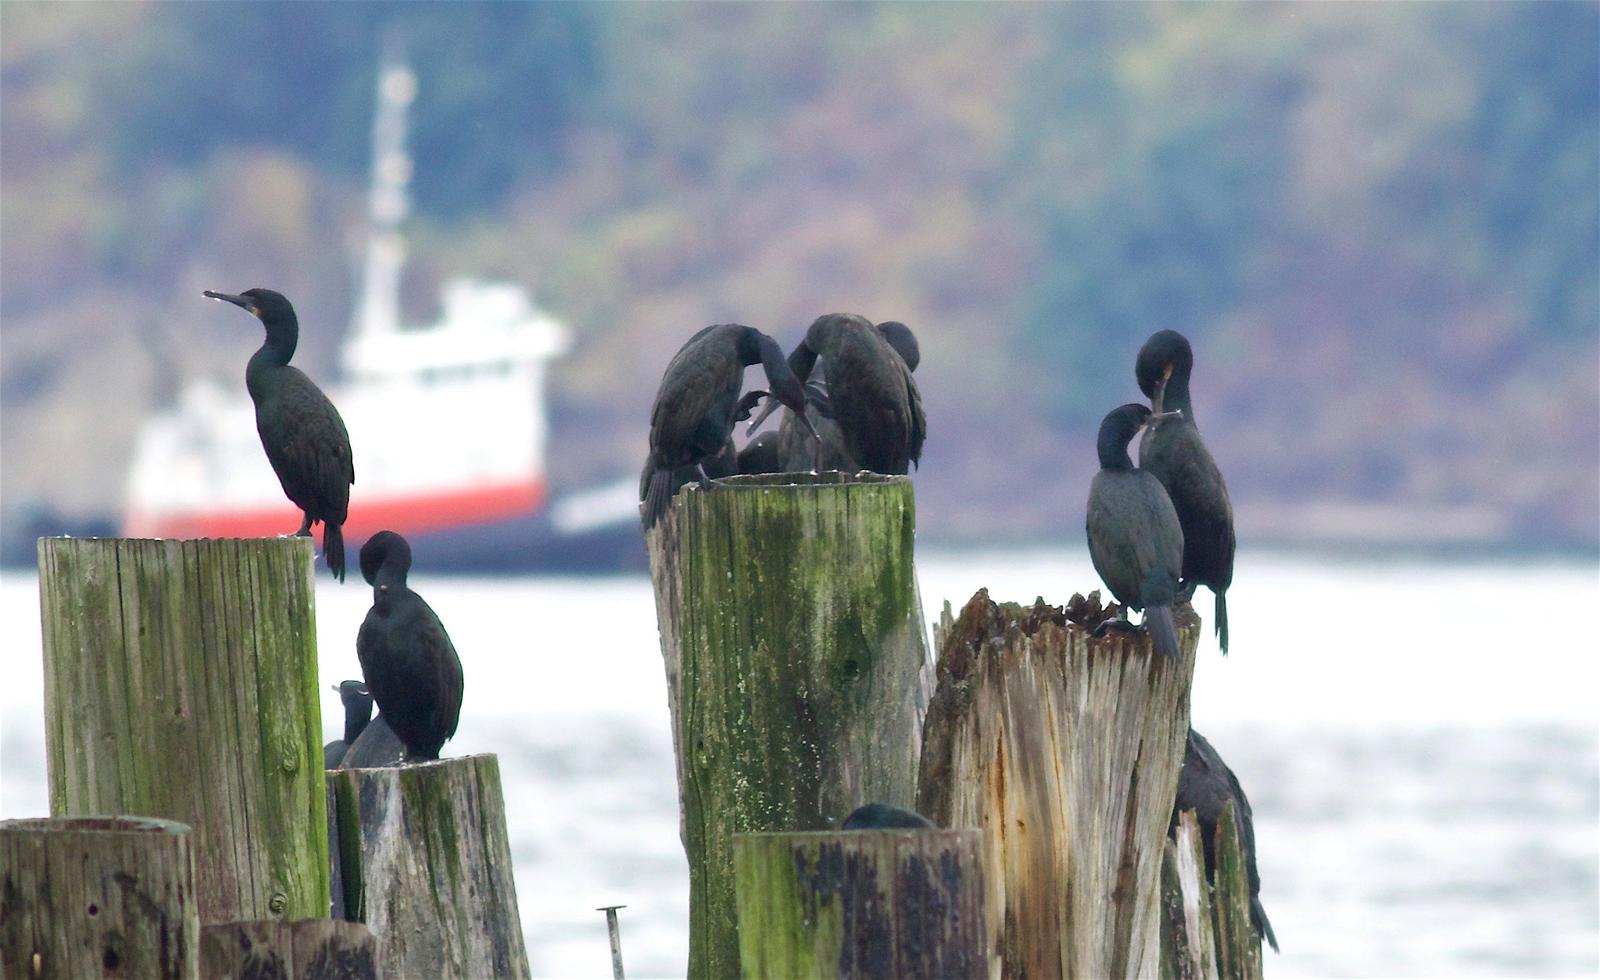 Brandt's Cormorant Photo by Kathryn Keith